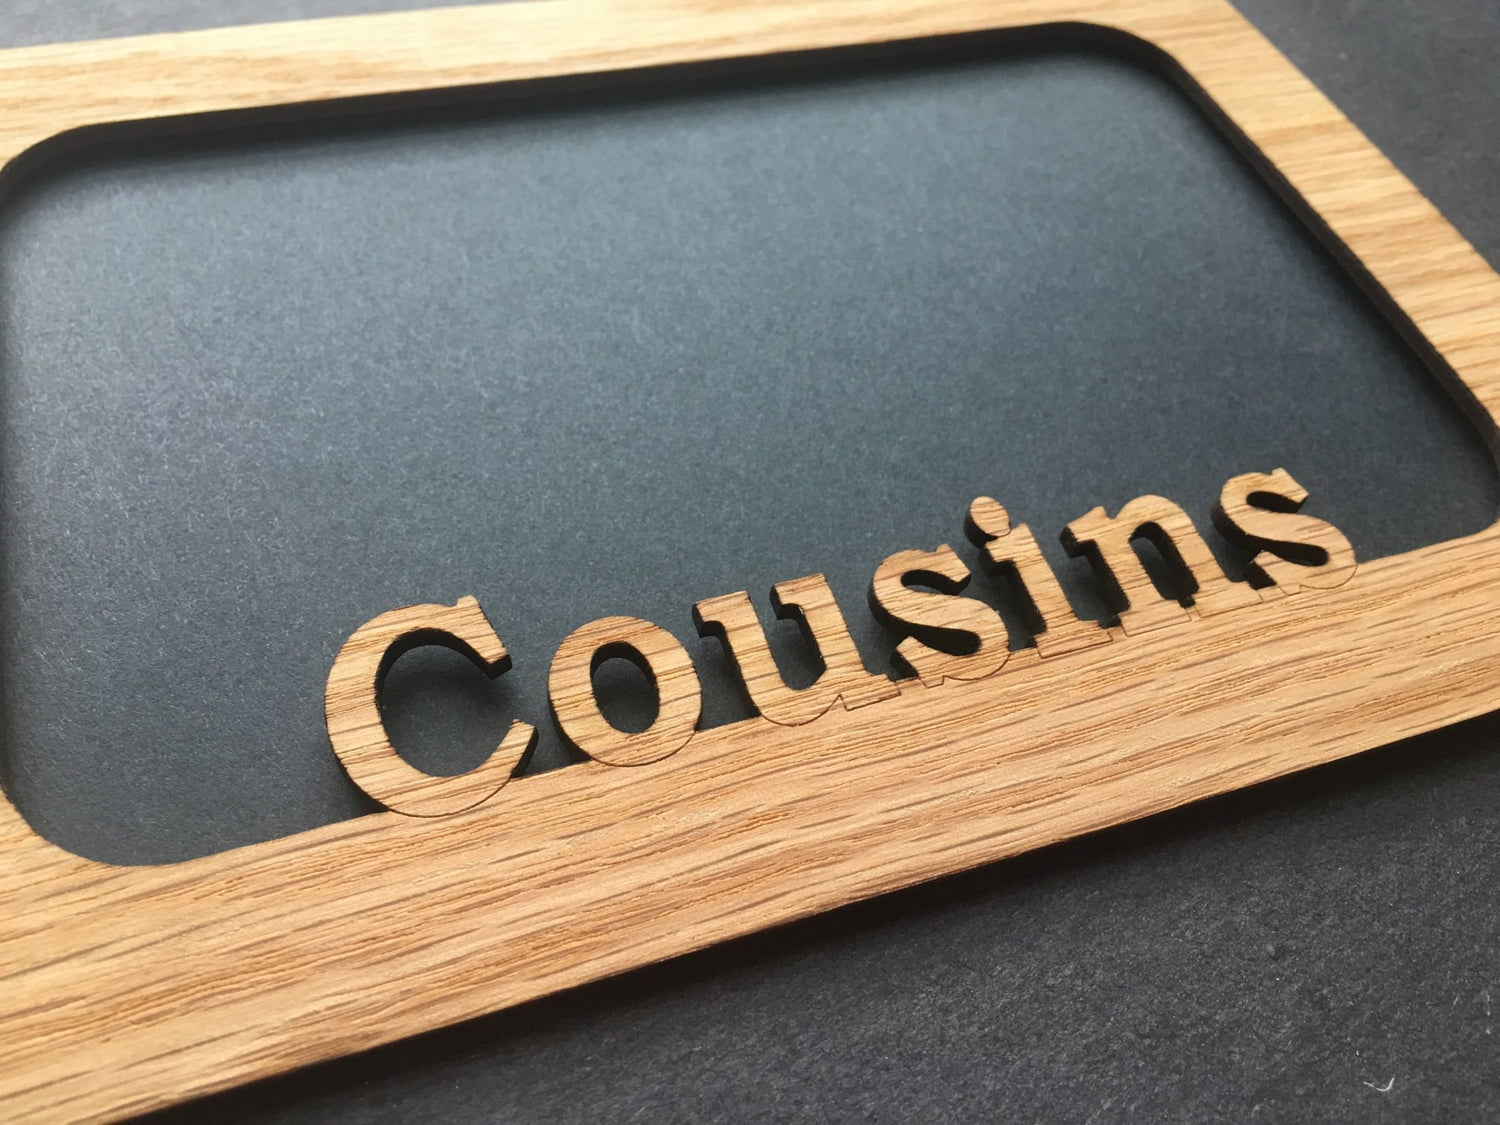 Cousins Picture Frame - 5x7 Frame Holds 4x6 Photo - Cousins Picture Frame - 5x7 Frame Holds 4x6 Photo - 5x7 Cousins Picture Frame, Picture Frame, home decor, laser engraved - Legacy Images - Legacy Images - Picture Frames - Legacy Images - Picture Frames